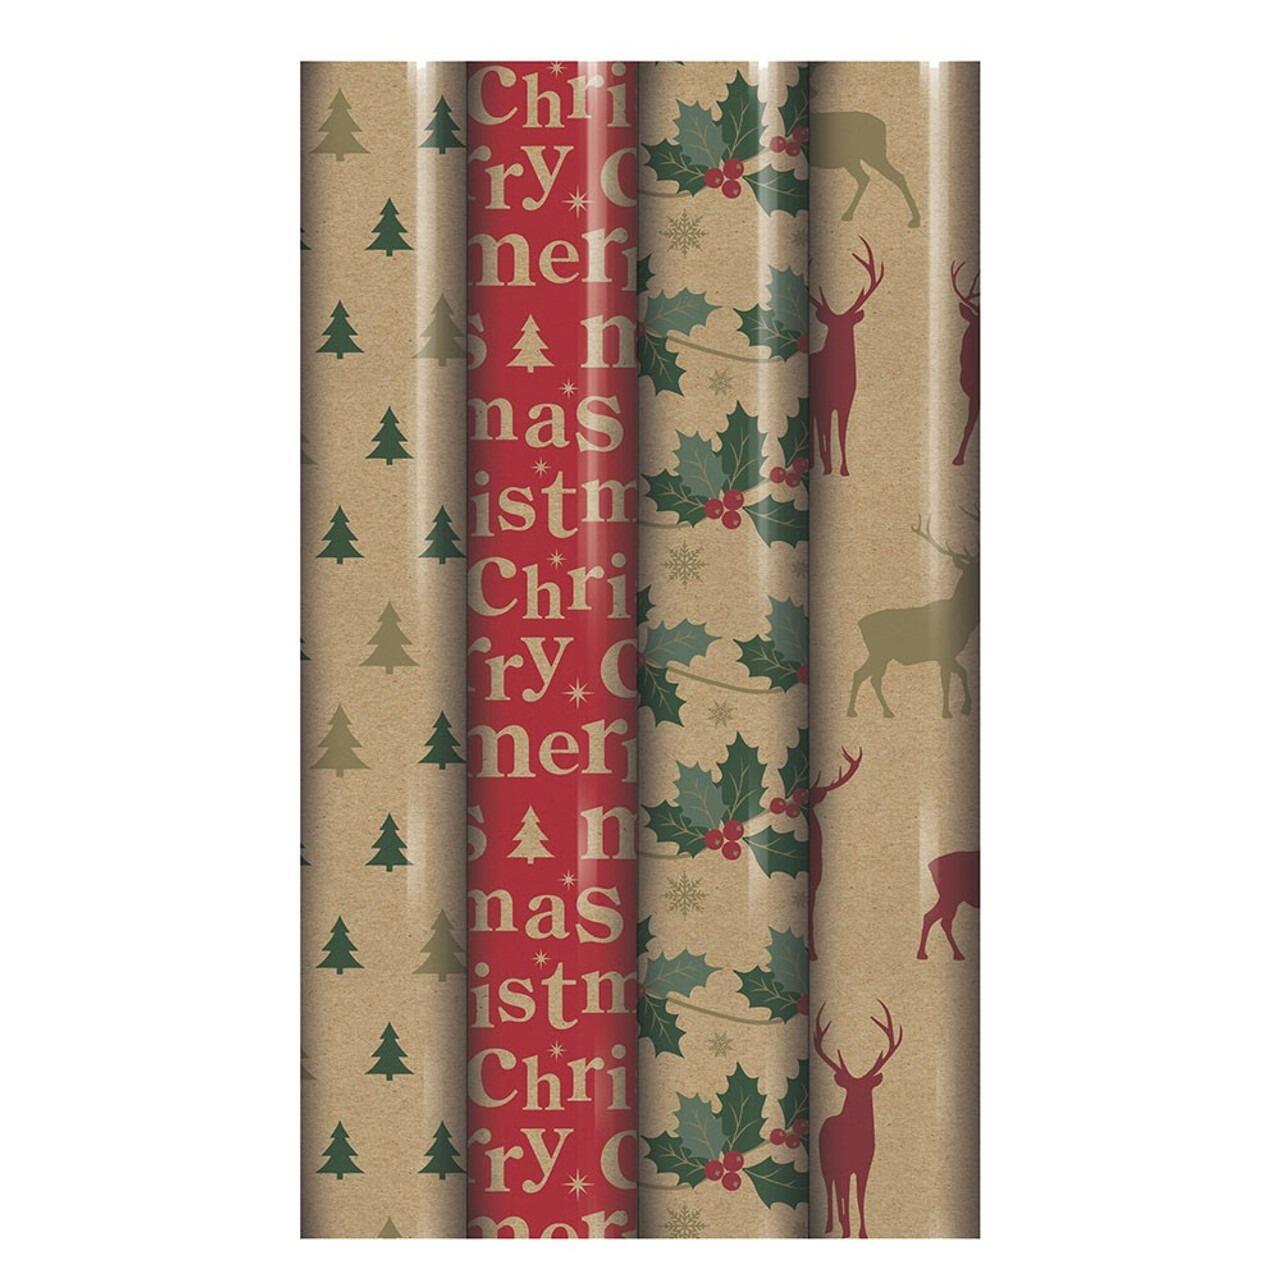 Christmas Up to 65% off Clearance! SRUILUO Christmas Wrapping Paper Value  Set - 10 Sheets Of Christmas Gift Wrapping Paper